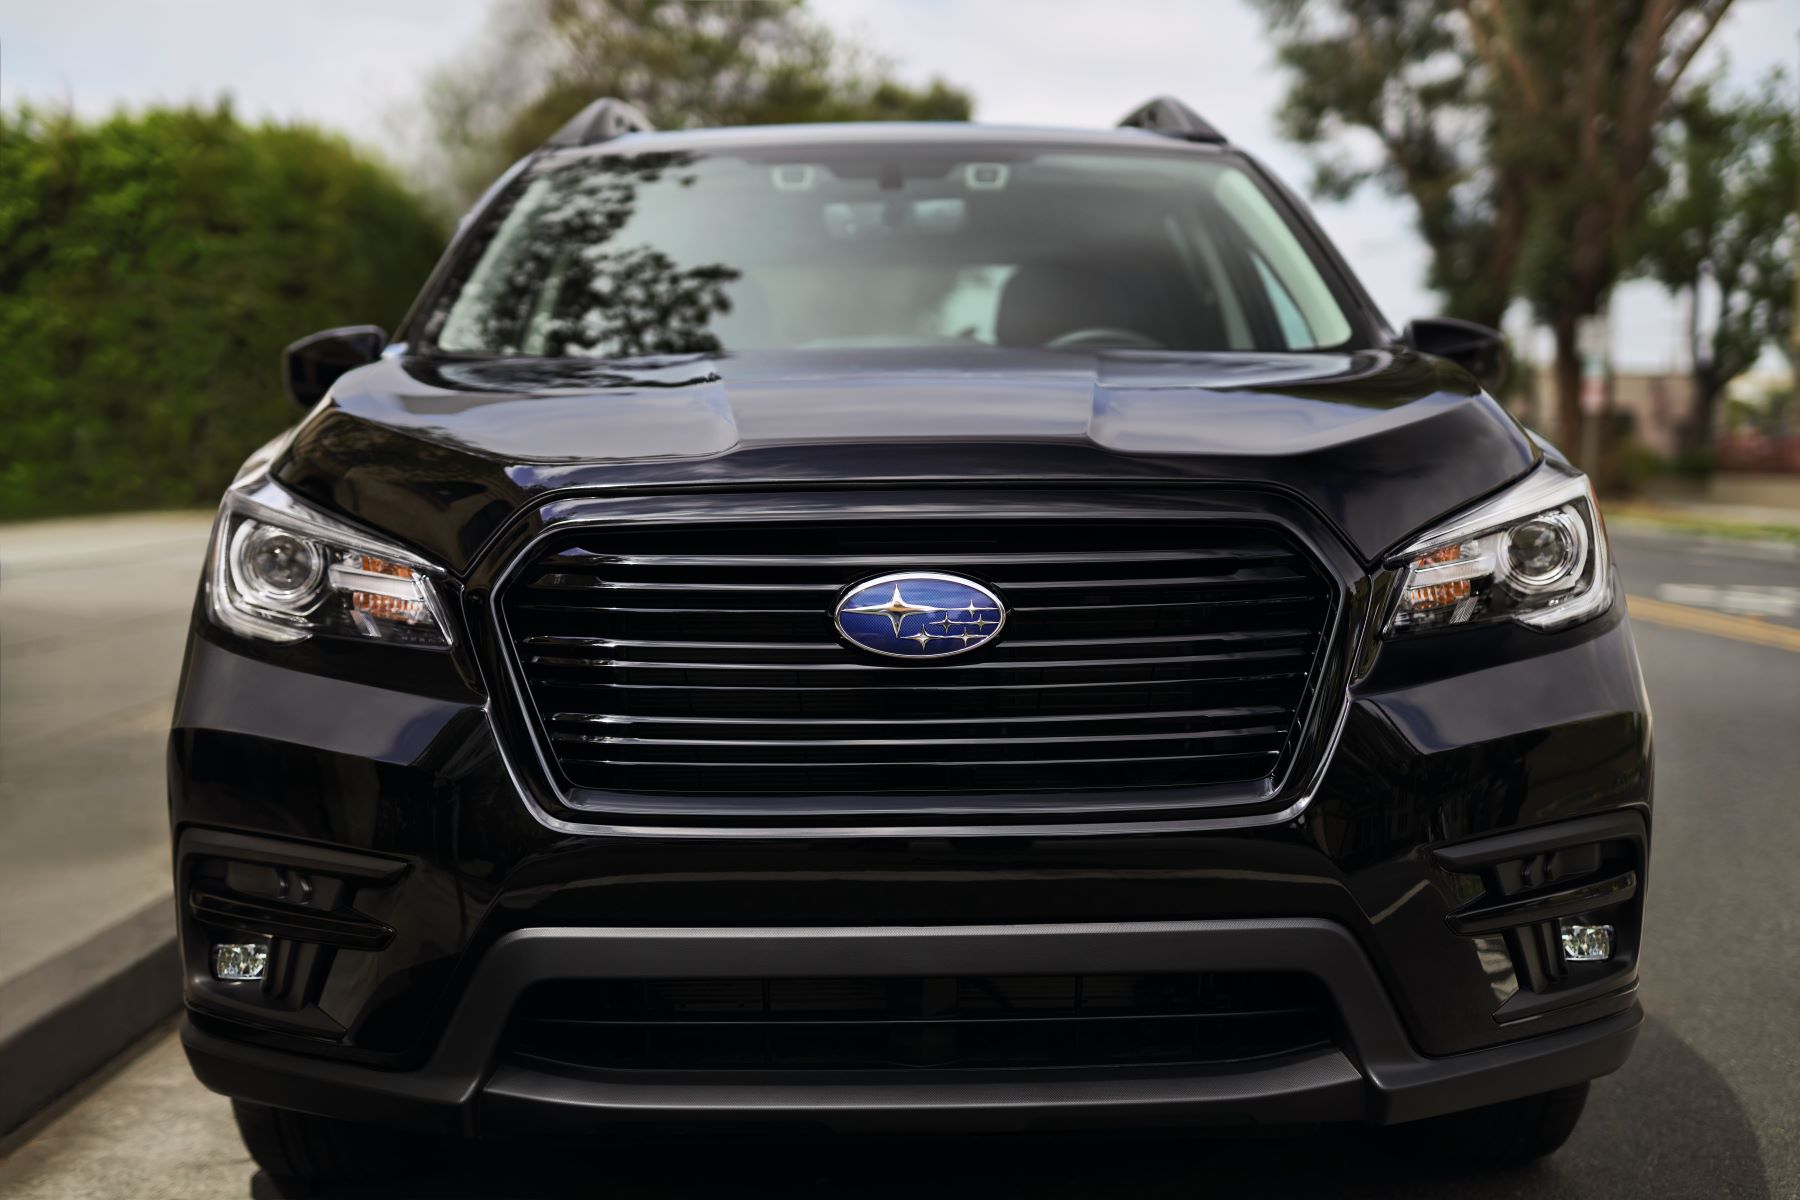 The 2022 Subaru Ascent Onyx Edition midsize SUV model grille, badging, and headlights